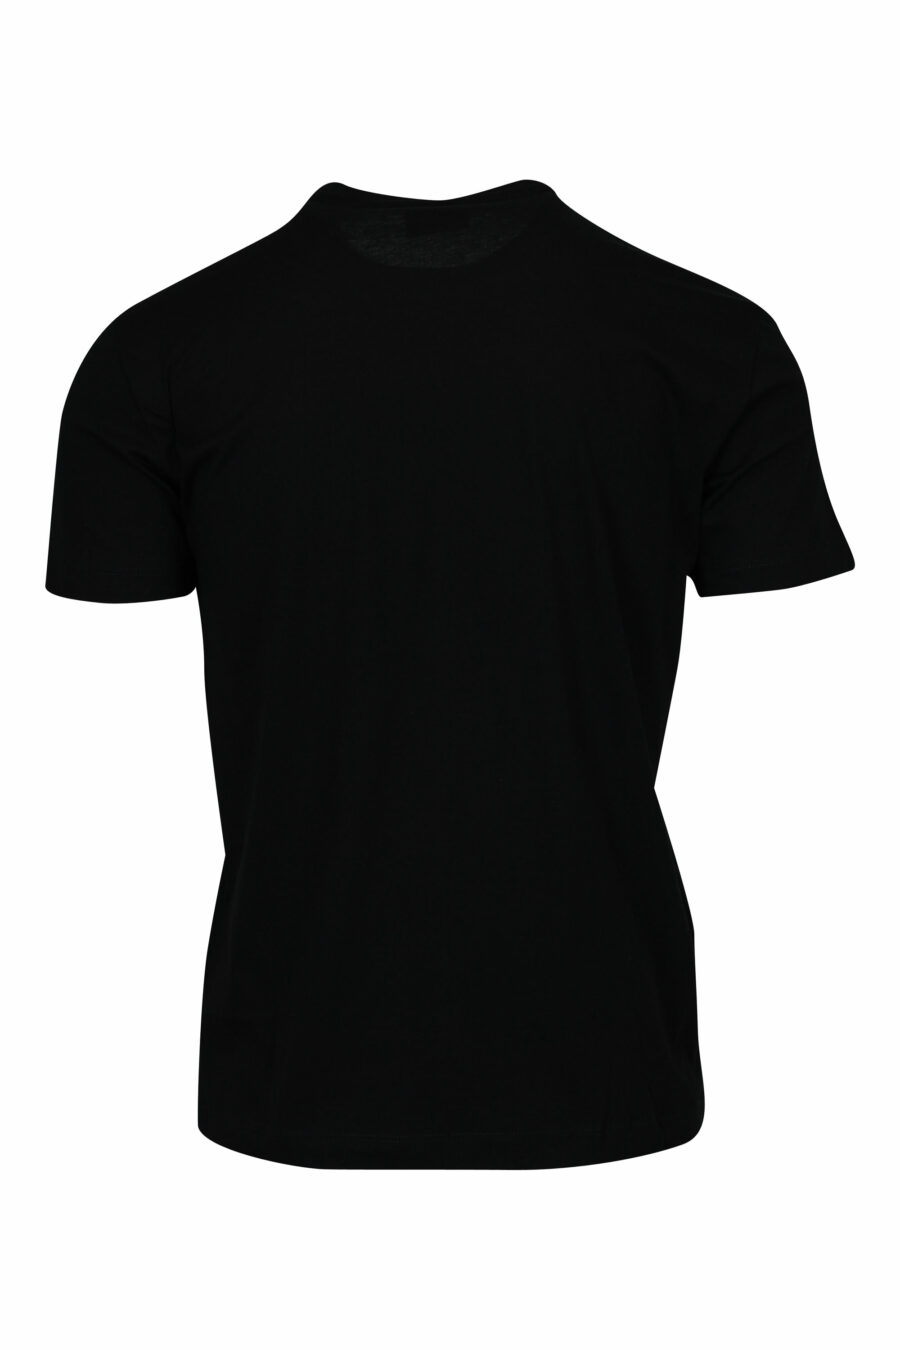 Black T-shirt with black "lux identity" minilogue on gold plate - 8058947471980 1